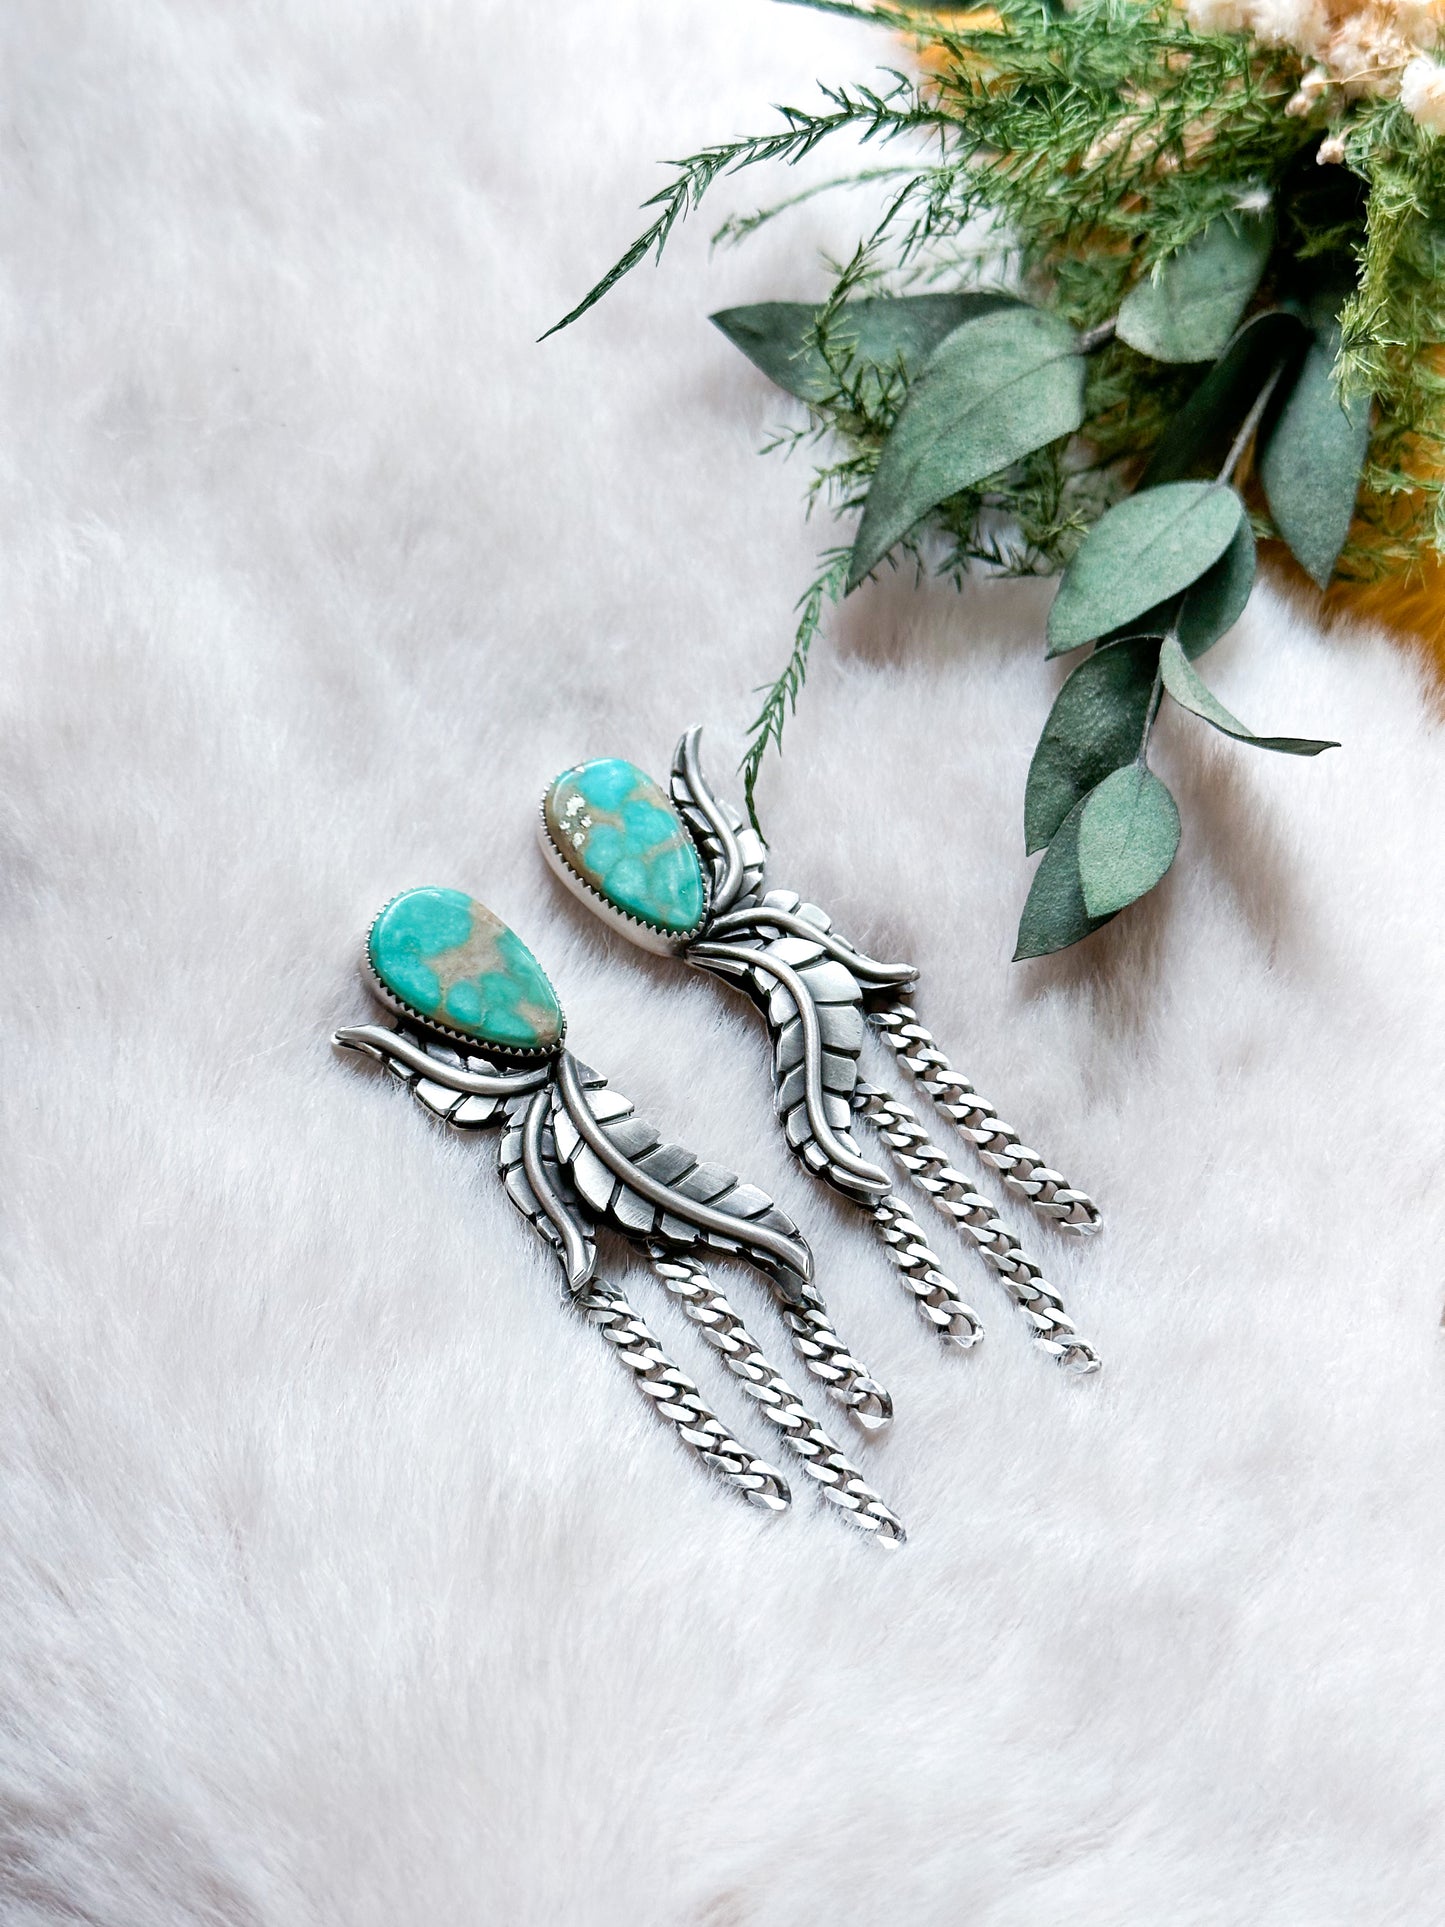 Botanical Fringe Earrings with Gorgeous Green and Gold Campitos Turquoise